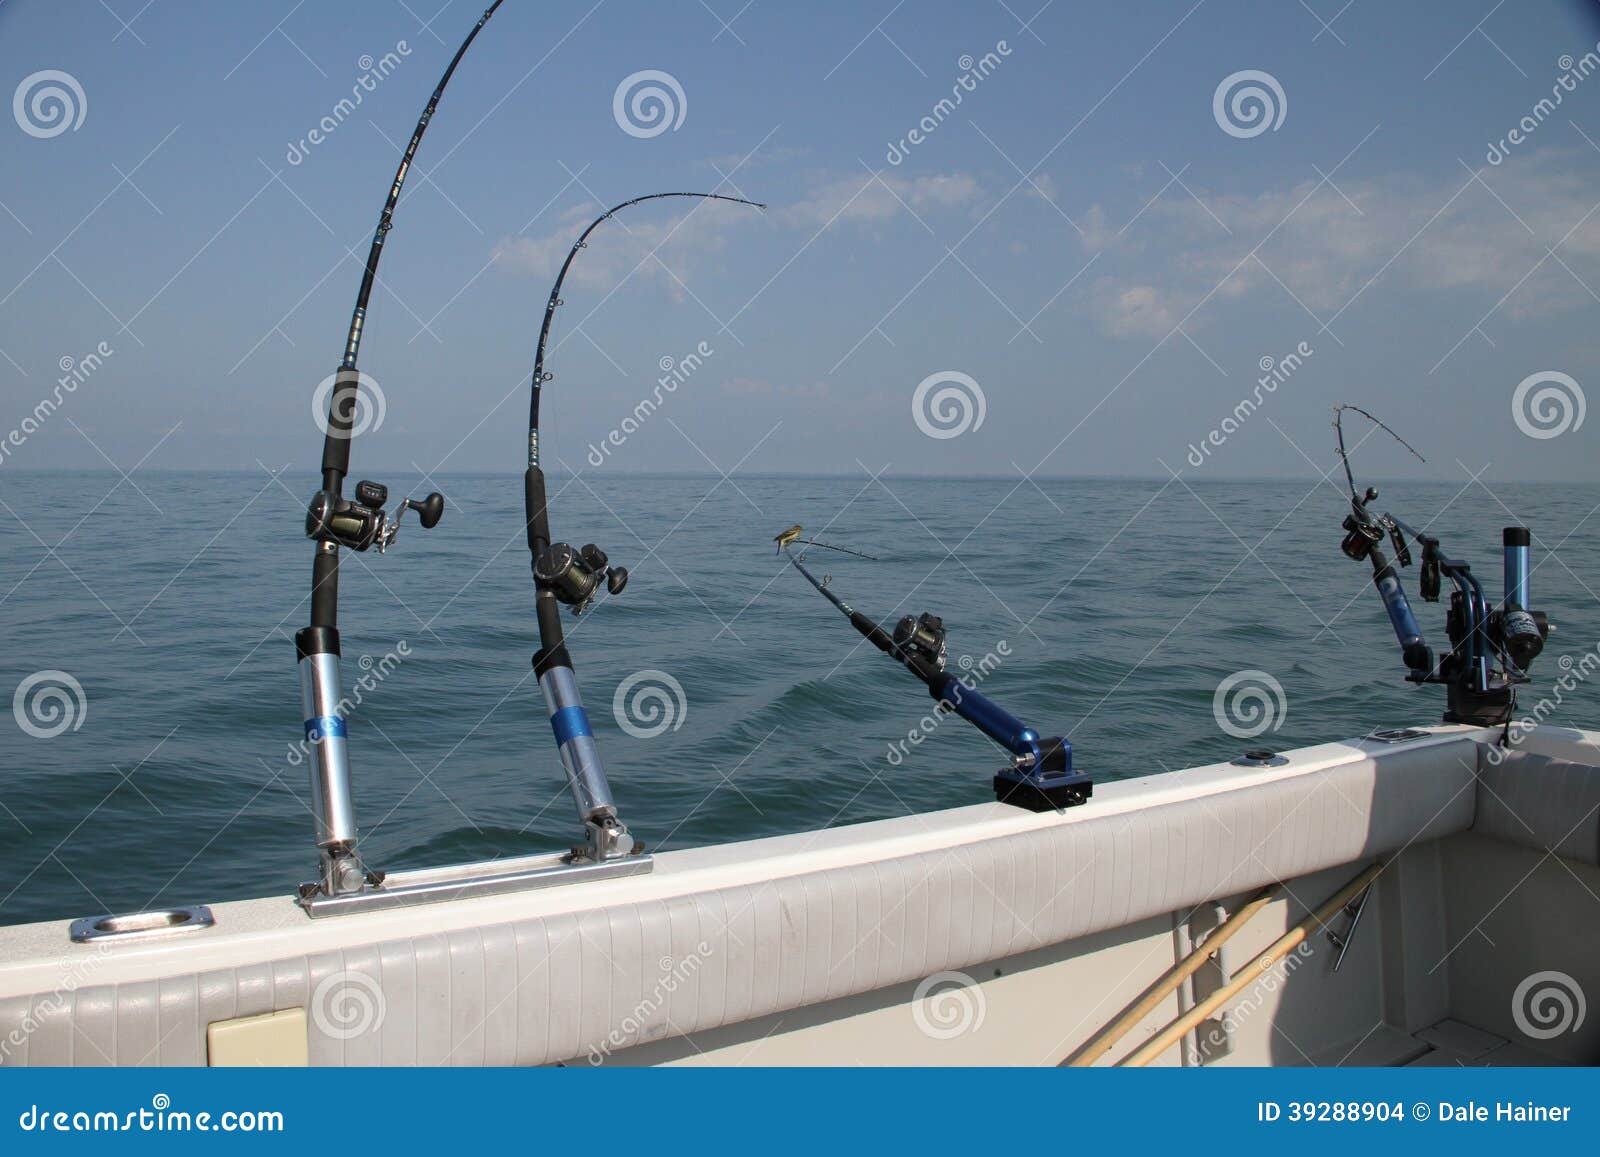 Fishing on the Great Lakes stock photo. Image of waves - 39288904